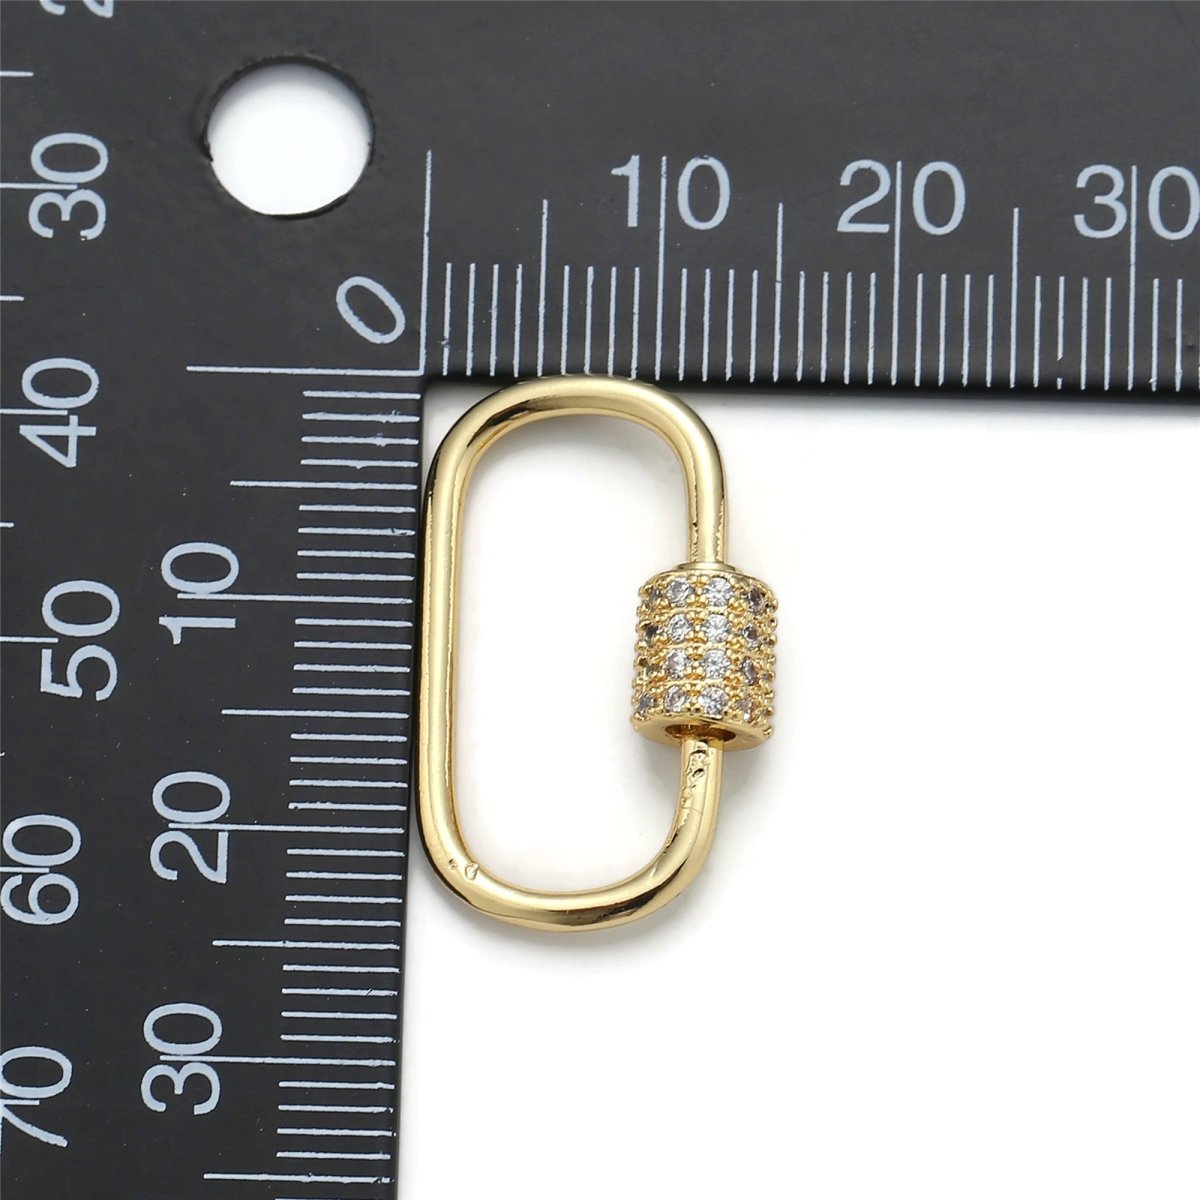 24K Gold-Plated Paperclip Oval Carabiner, Circle Screw Clasp with Zirconia Rhinestones, Silver, Gold, or Black Option - DLUXCA